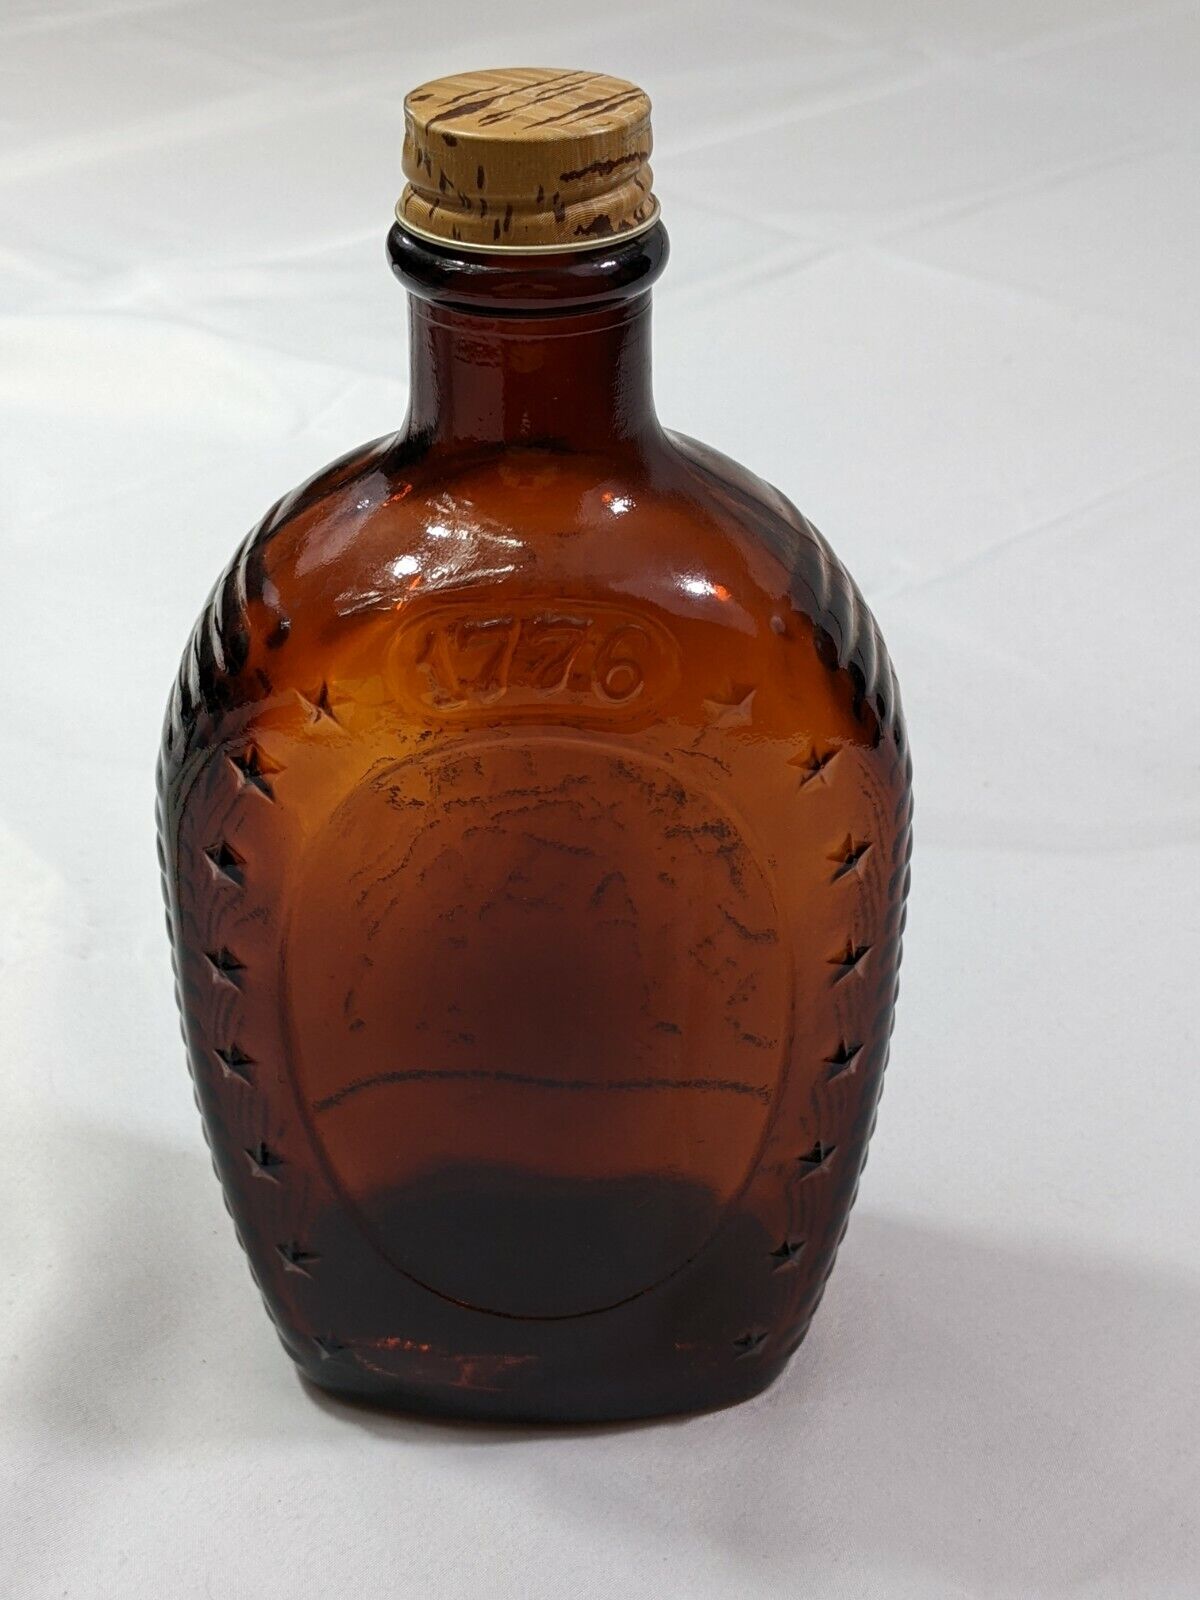 1776 Log Cabin Syrup Bicentennial Glass Bottle with Cap